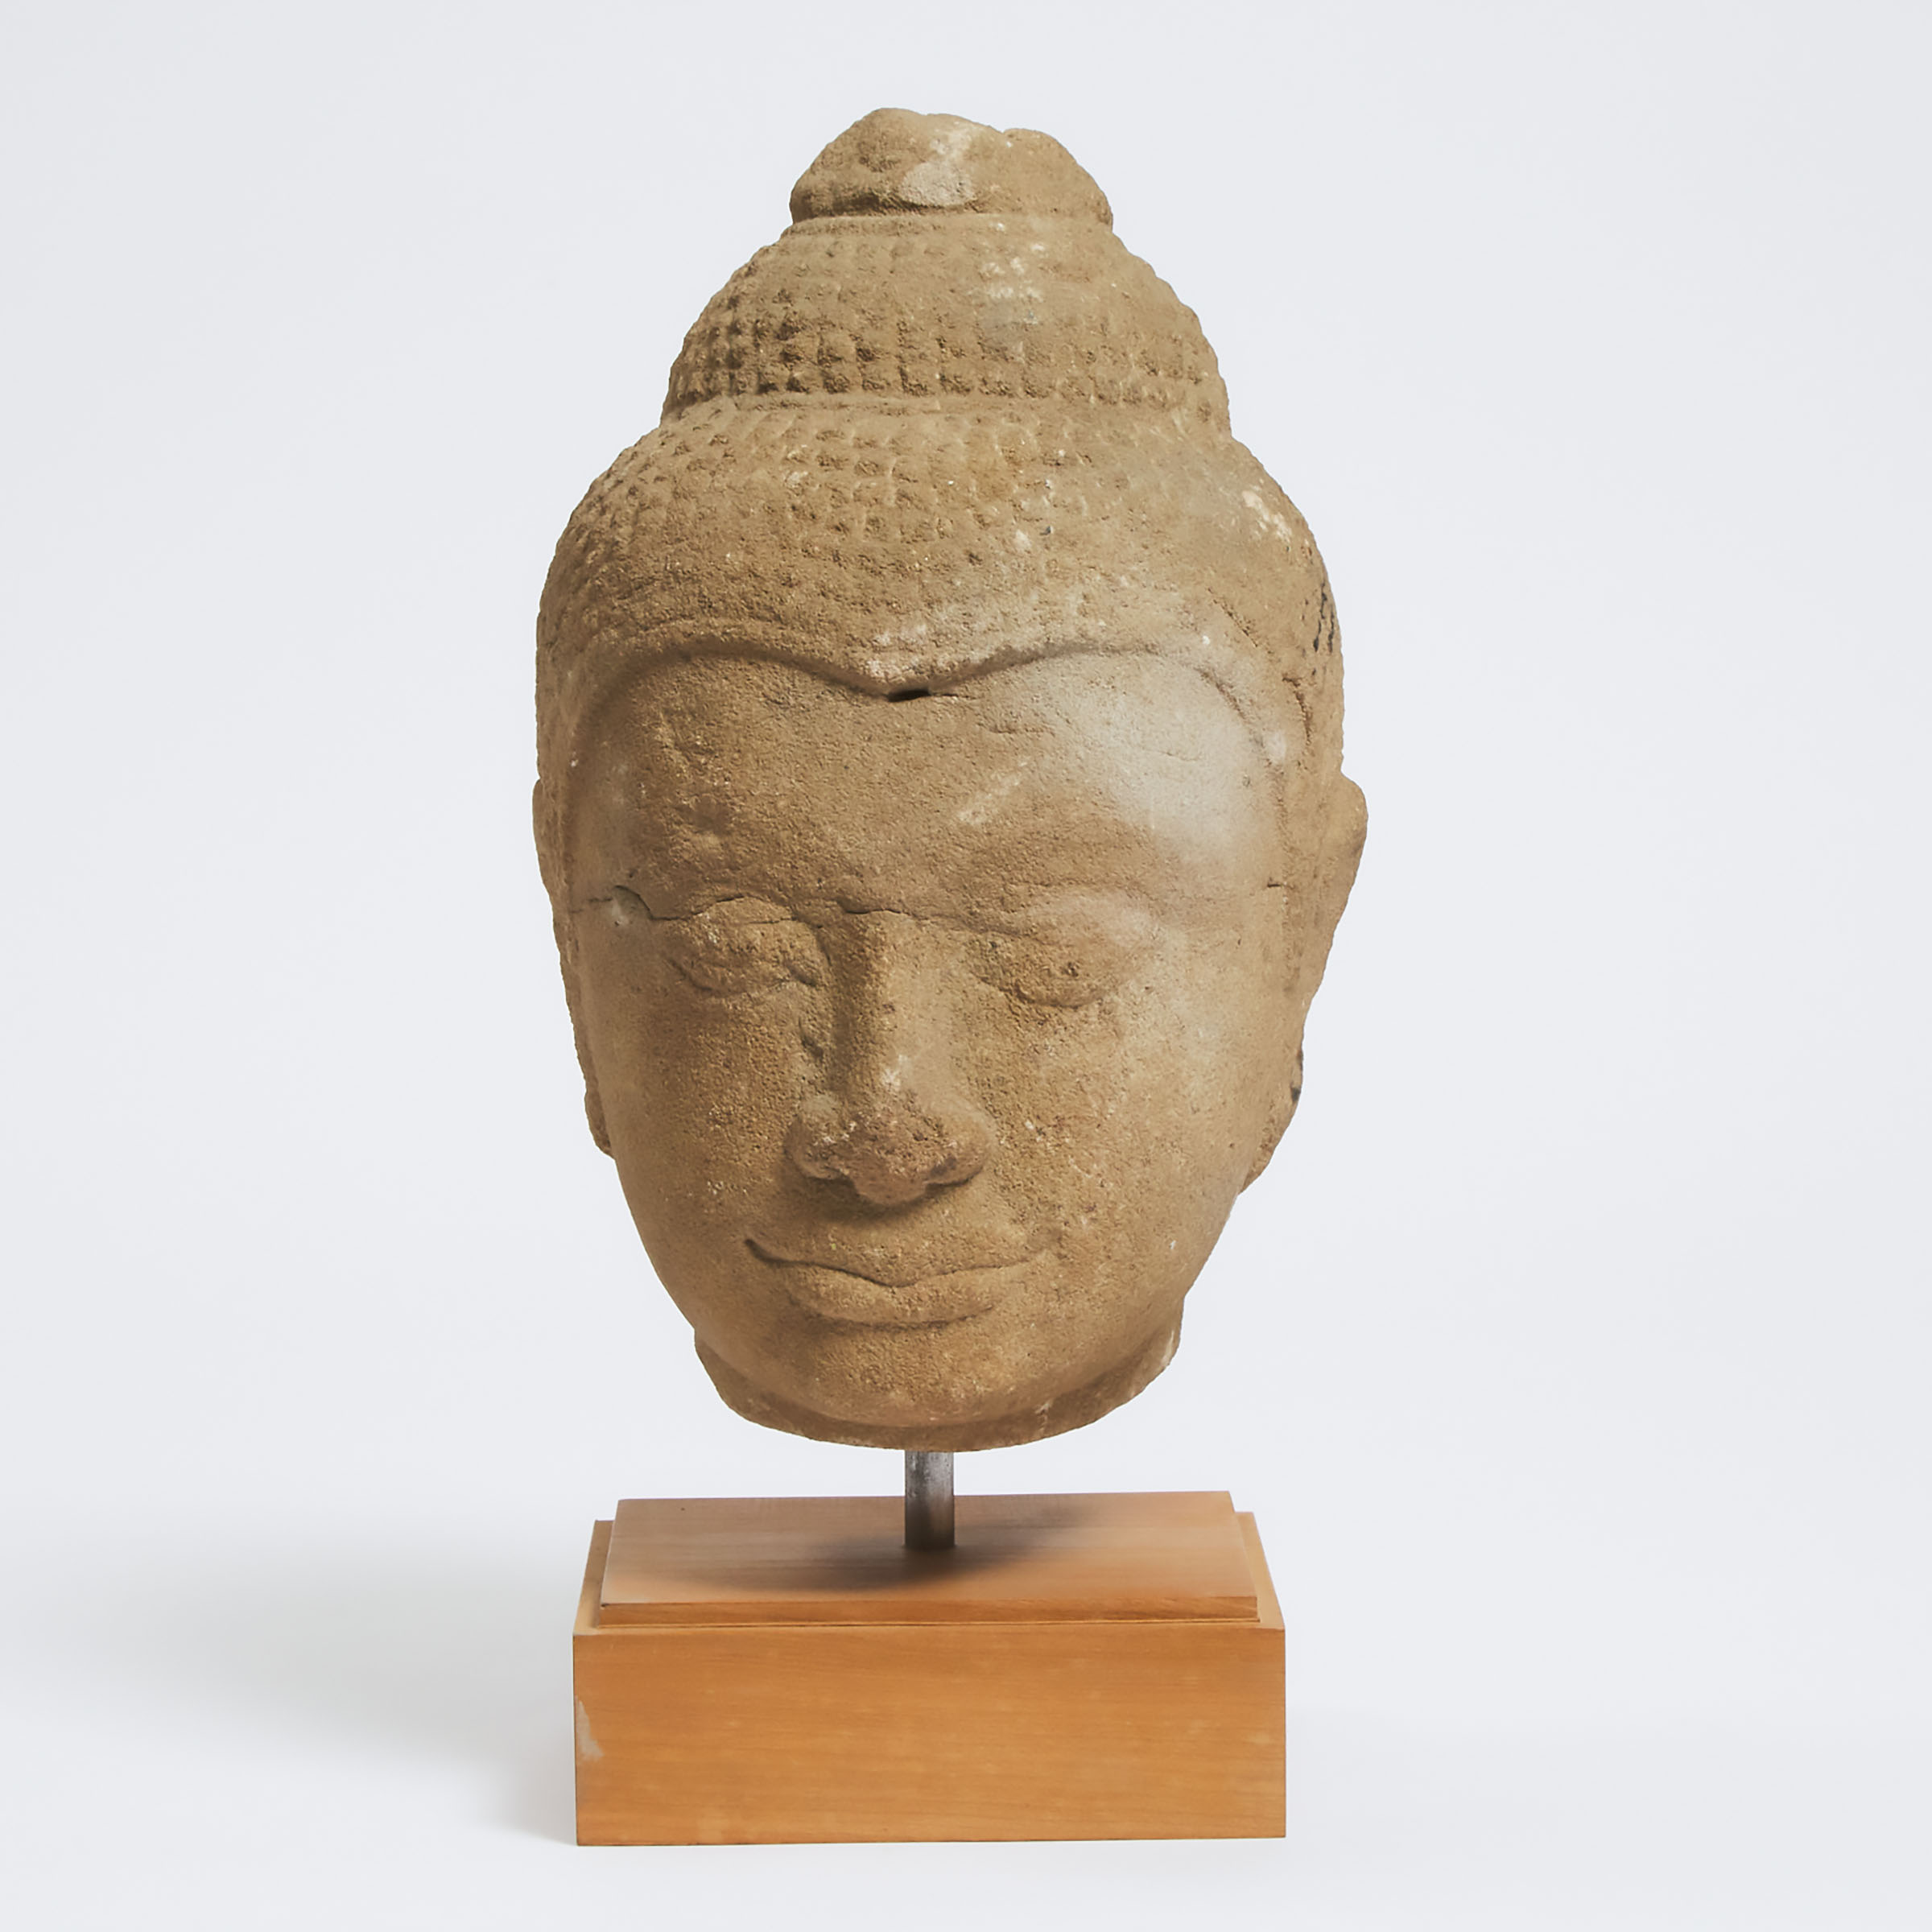 A Large Ayutthaya Style Stone Head of Buddha, Thailand, 17th Century or Later